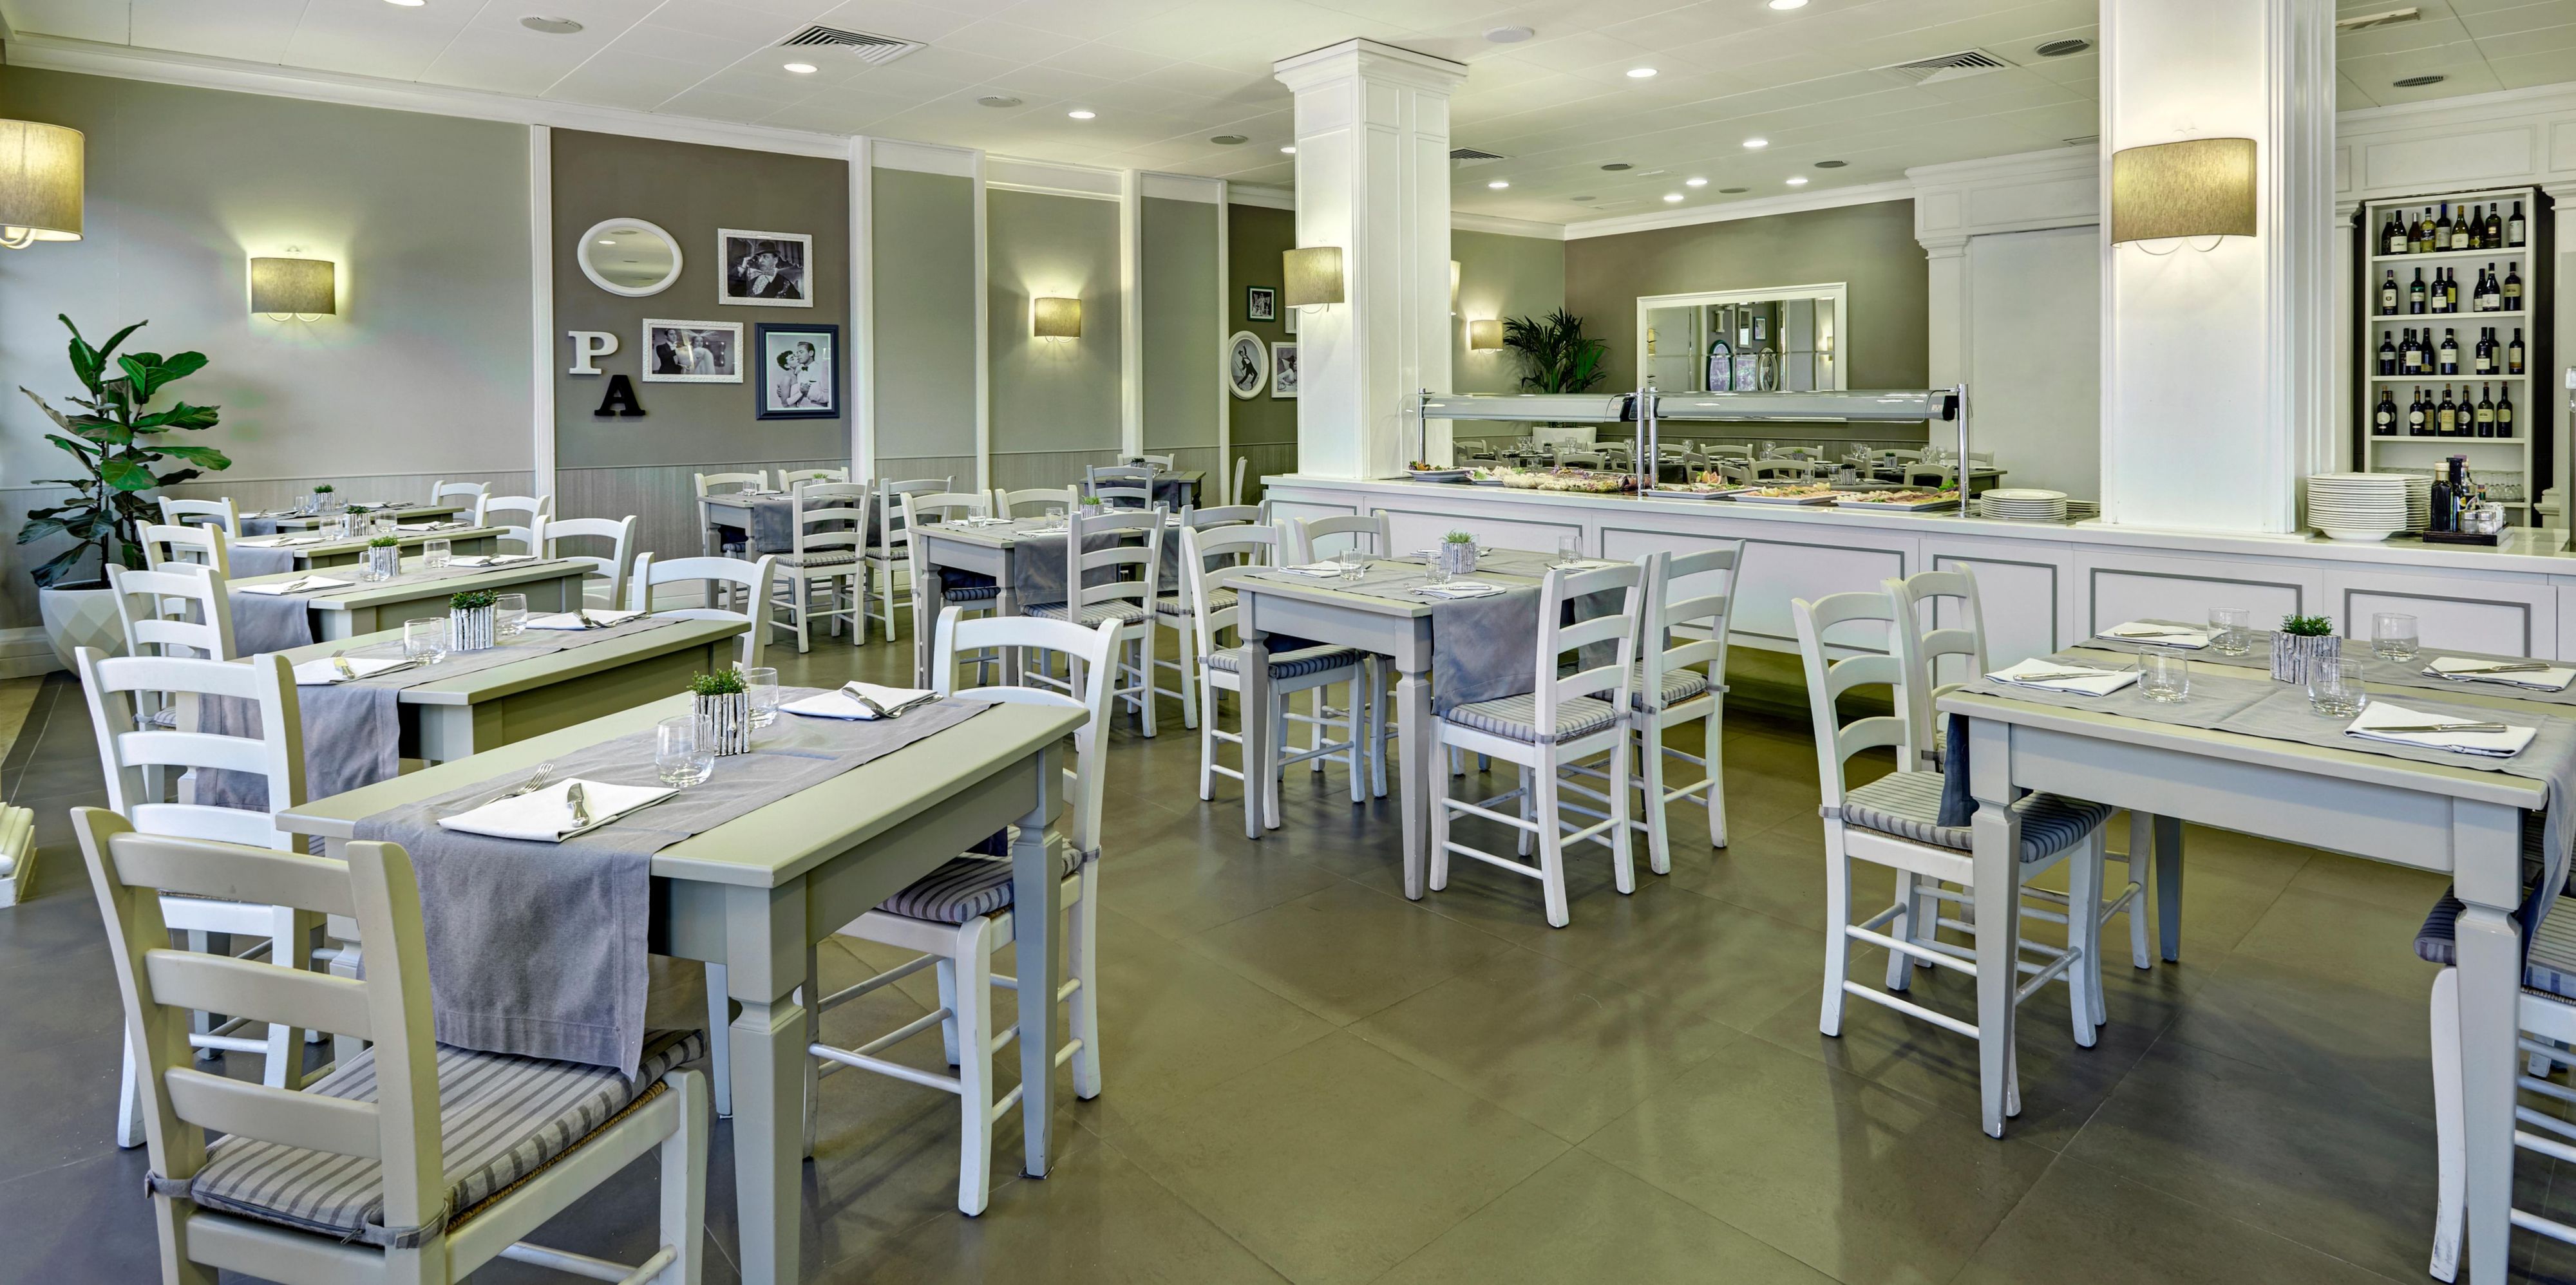 Enjoy the contemporary setting of our Papillon Restaurant